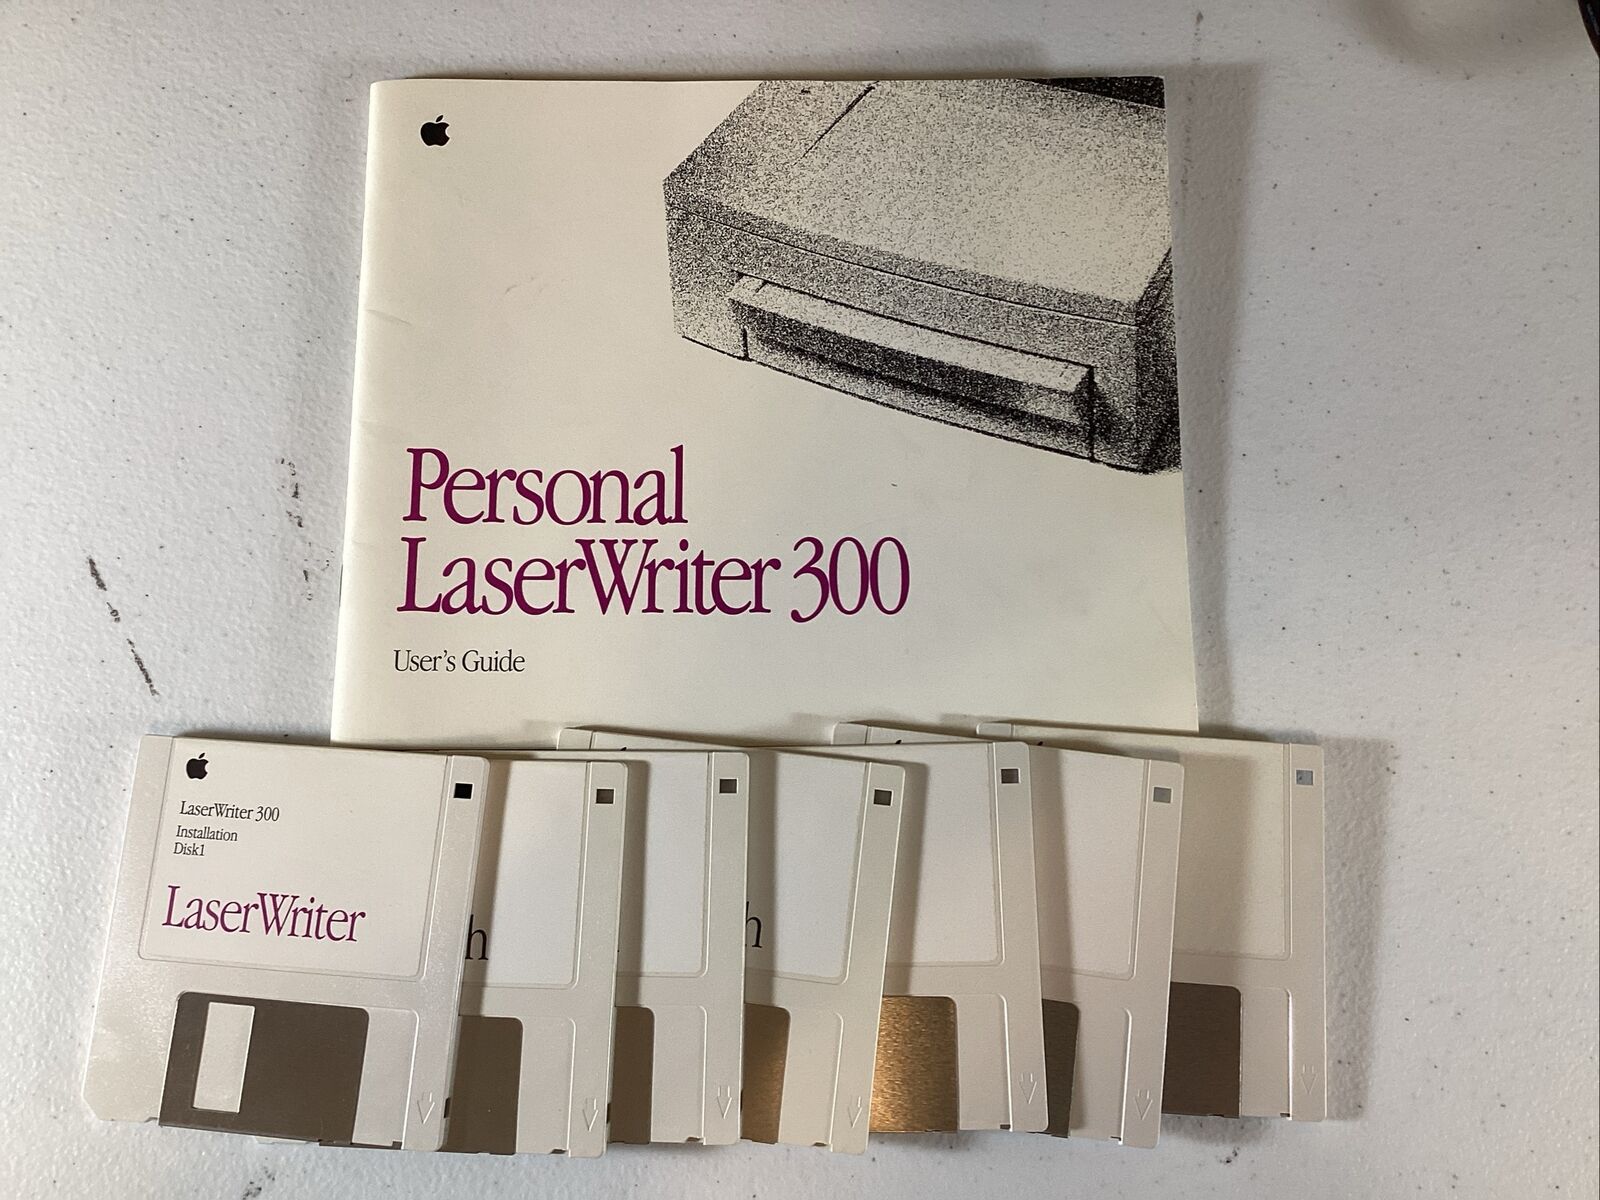 Apple Personal LaserWriter 300 - User’s Guide and Software Floppy Disks